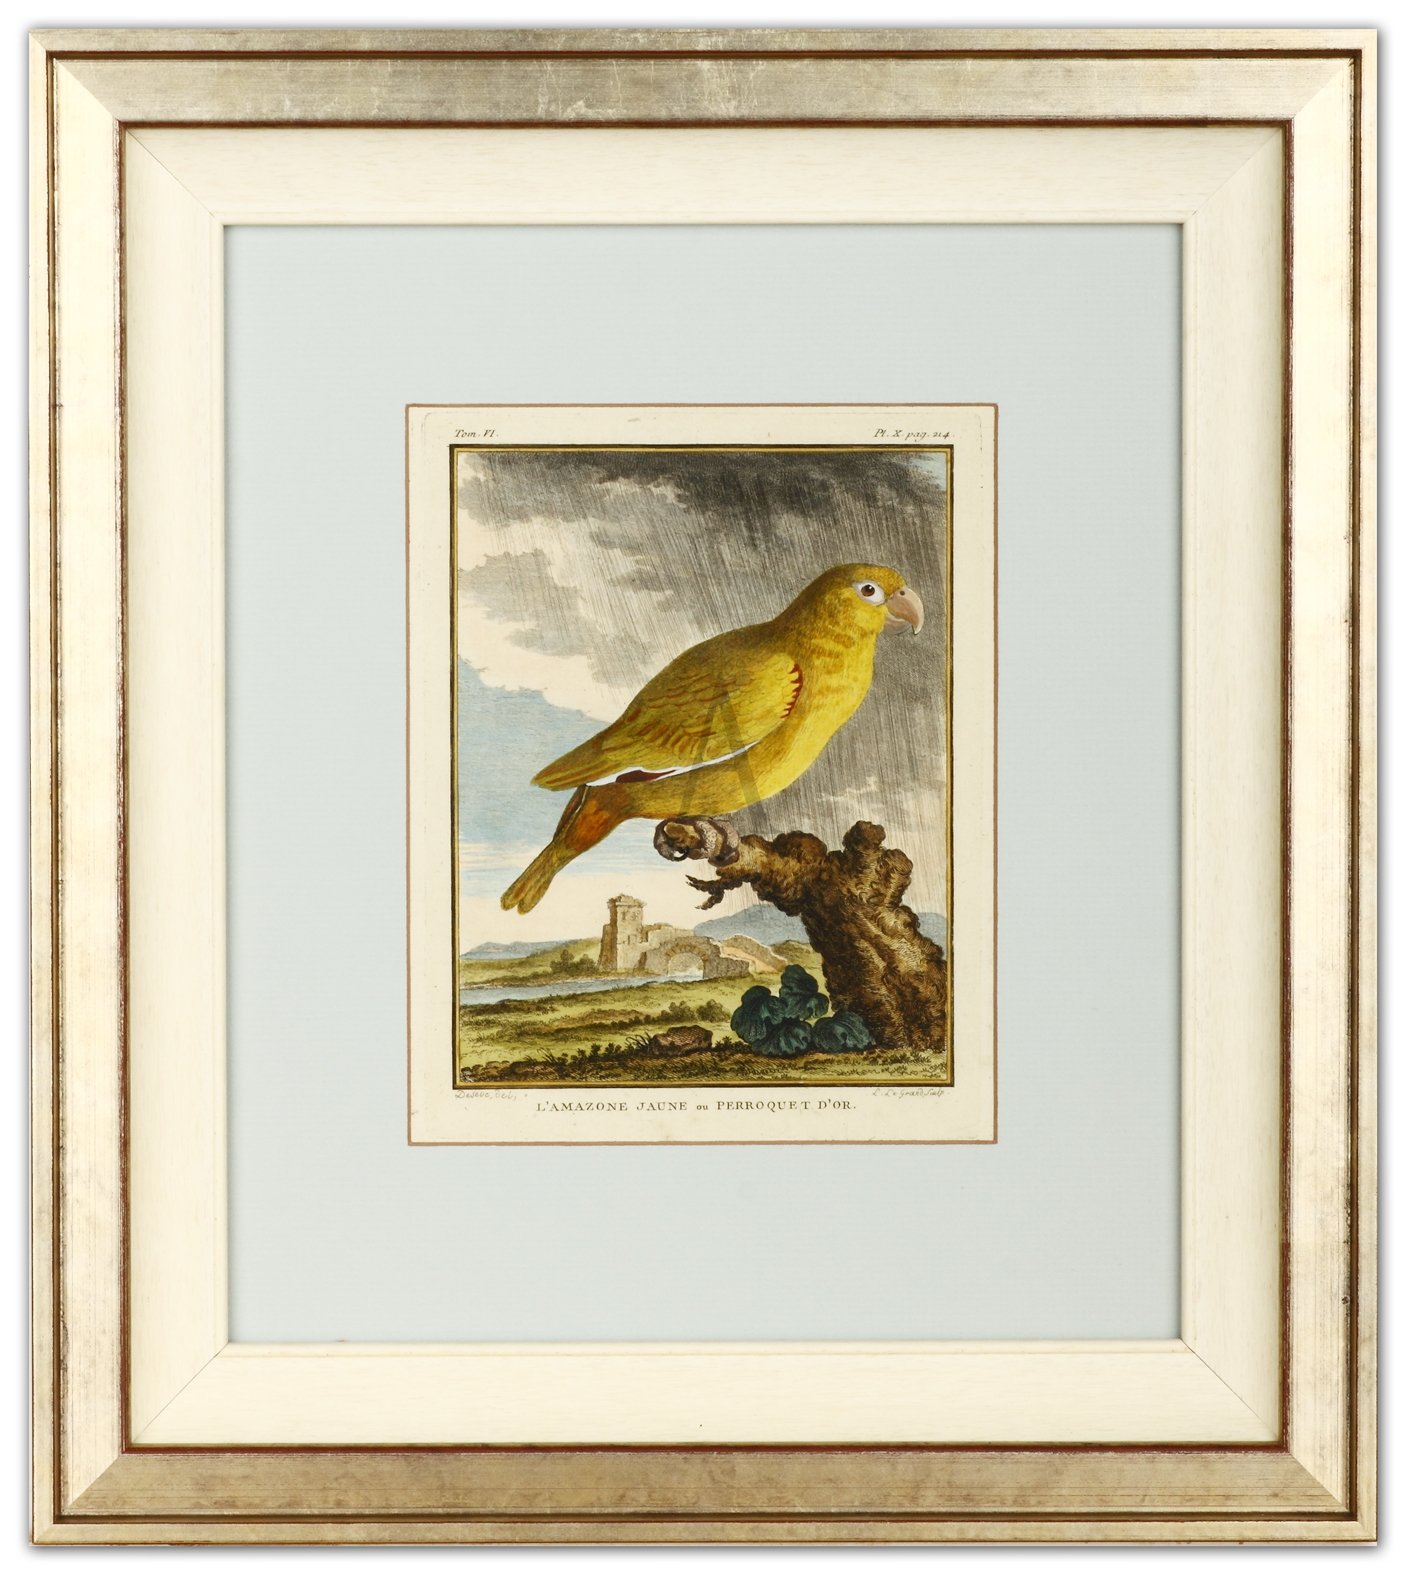 L'Amazone, Jaune ou Perroquet D'Or - Antique Print from 1785